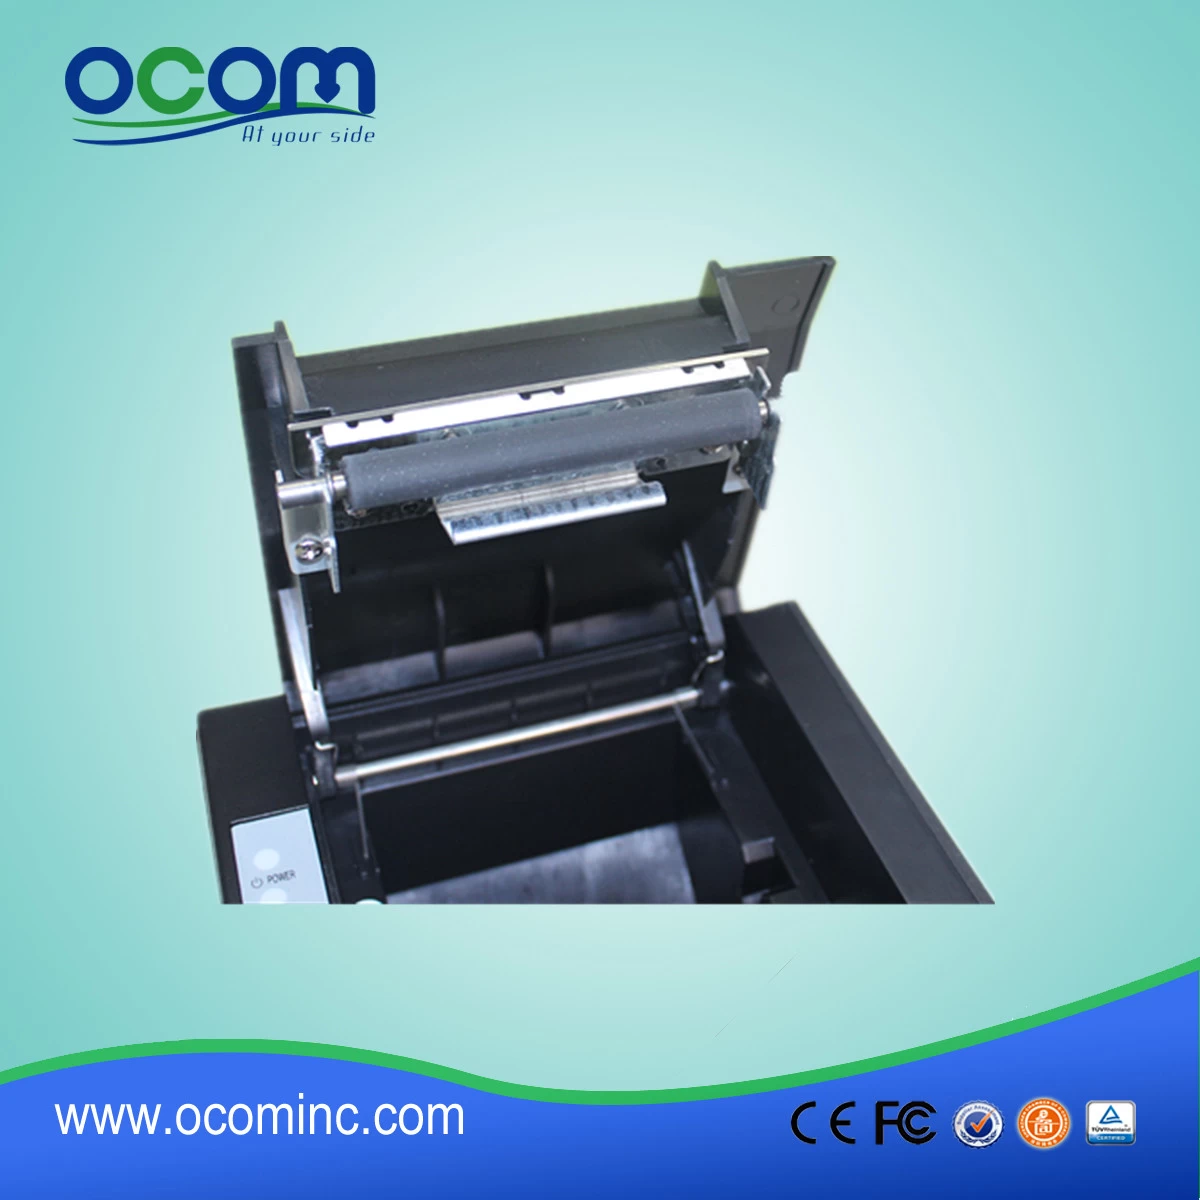 Low-Priced 80mm Android USB Thermal Printer OCPP-88A-U